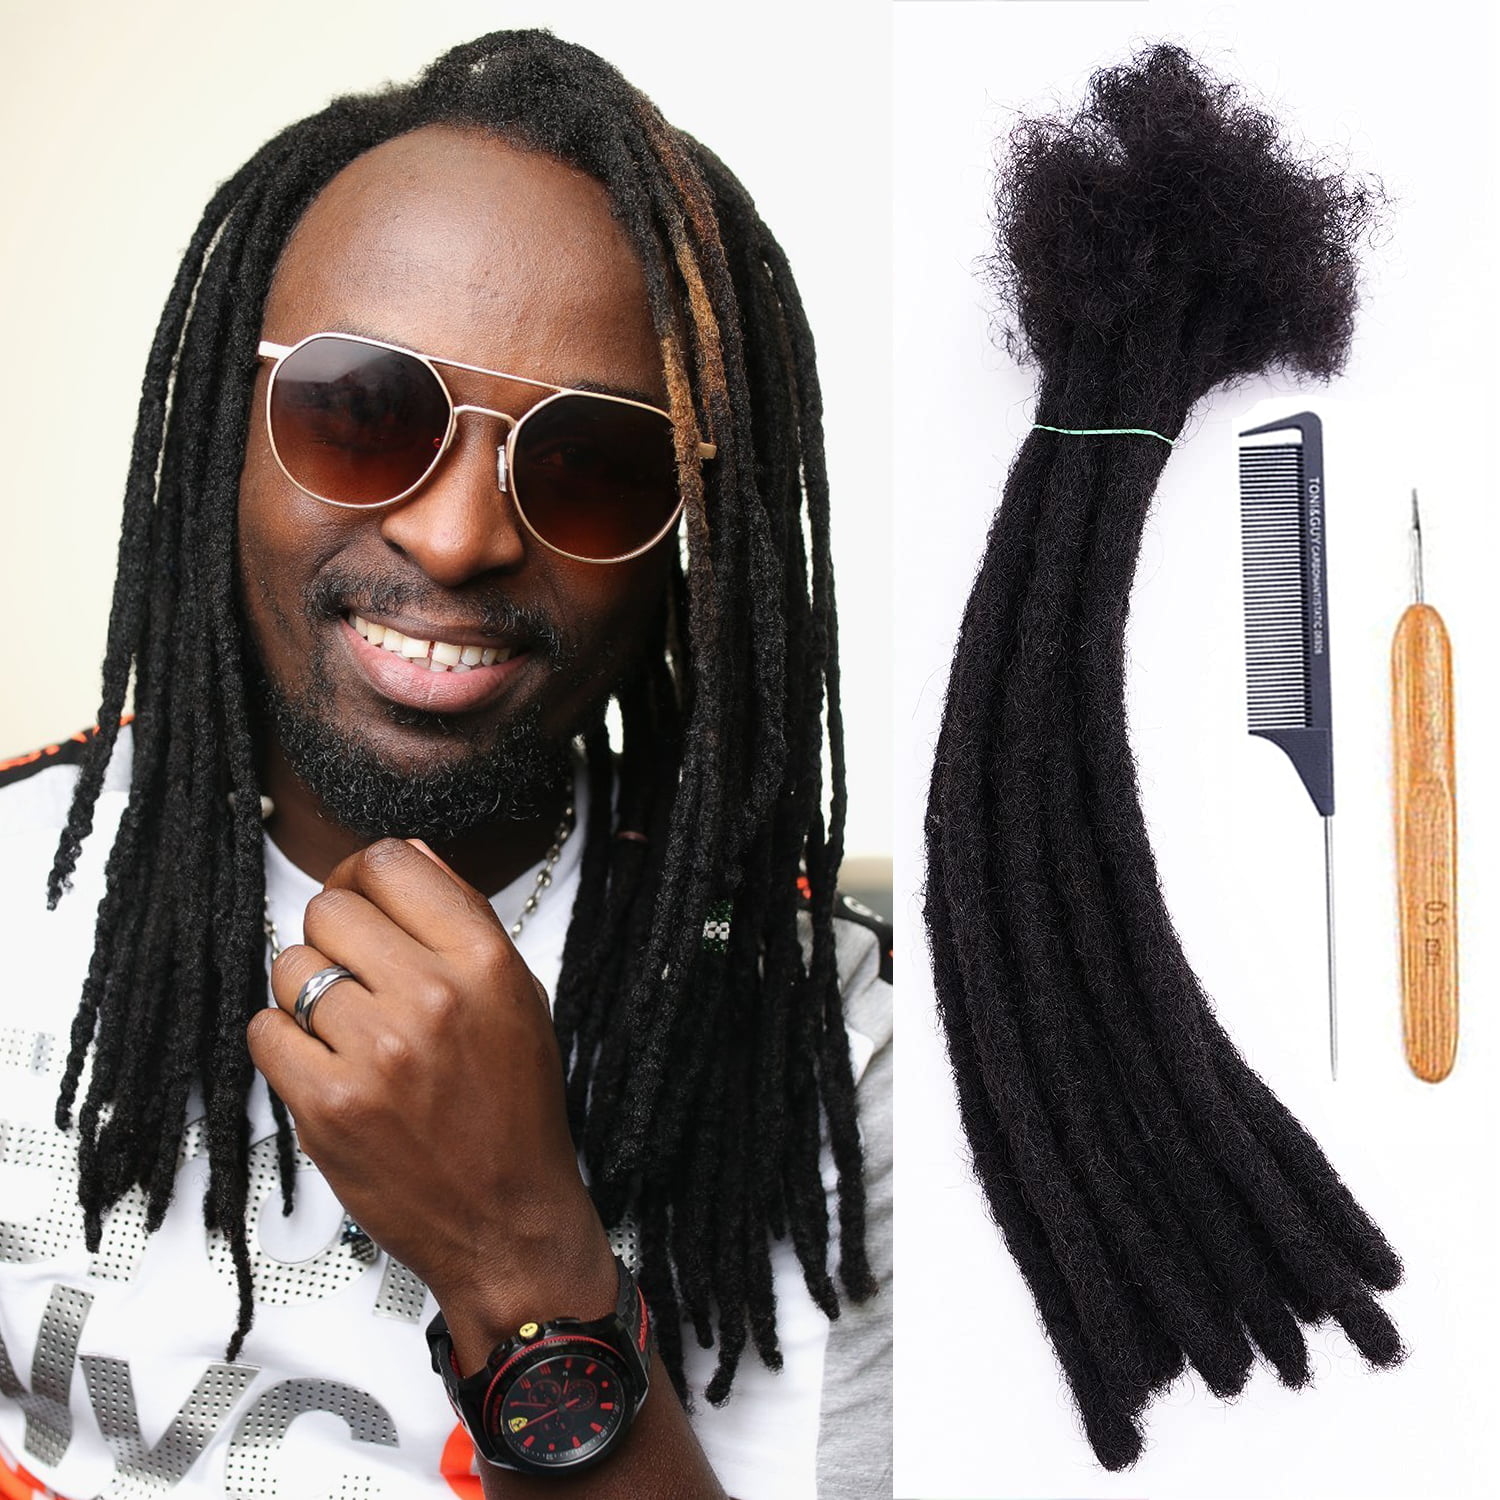 Loc Extensions Human Hair 30 strands,10 Inch  Width Human Hair  Dreadlock Extensions for Men/Women Full Handmade Permanent Dread Extensions  Can Be Dyed and Bleached(,8 inch,1B) 